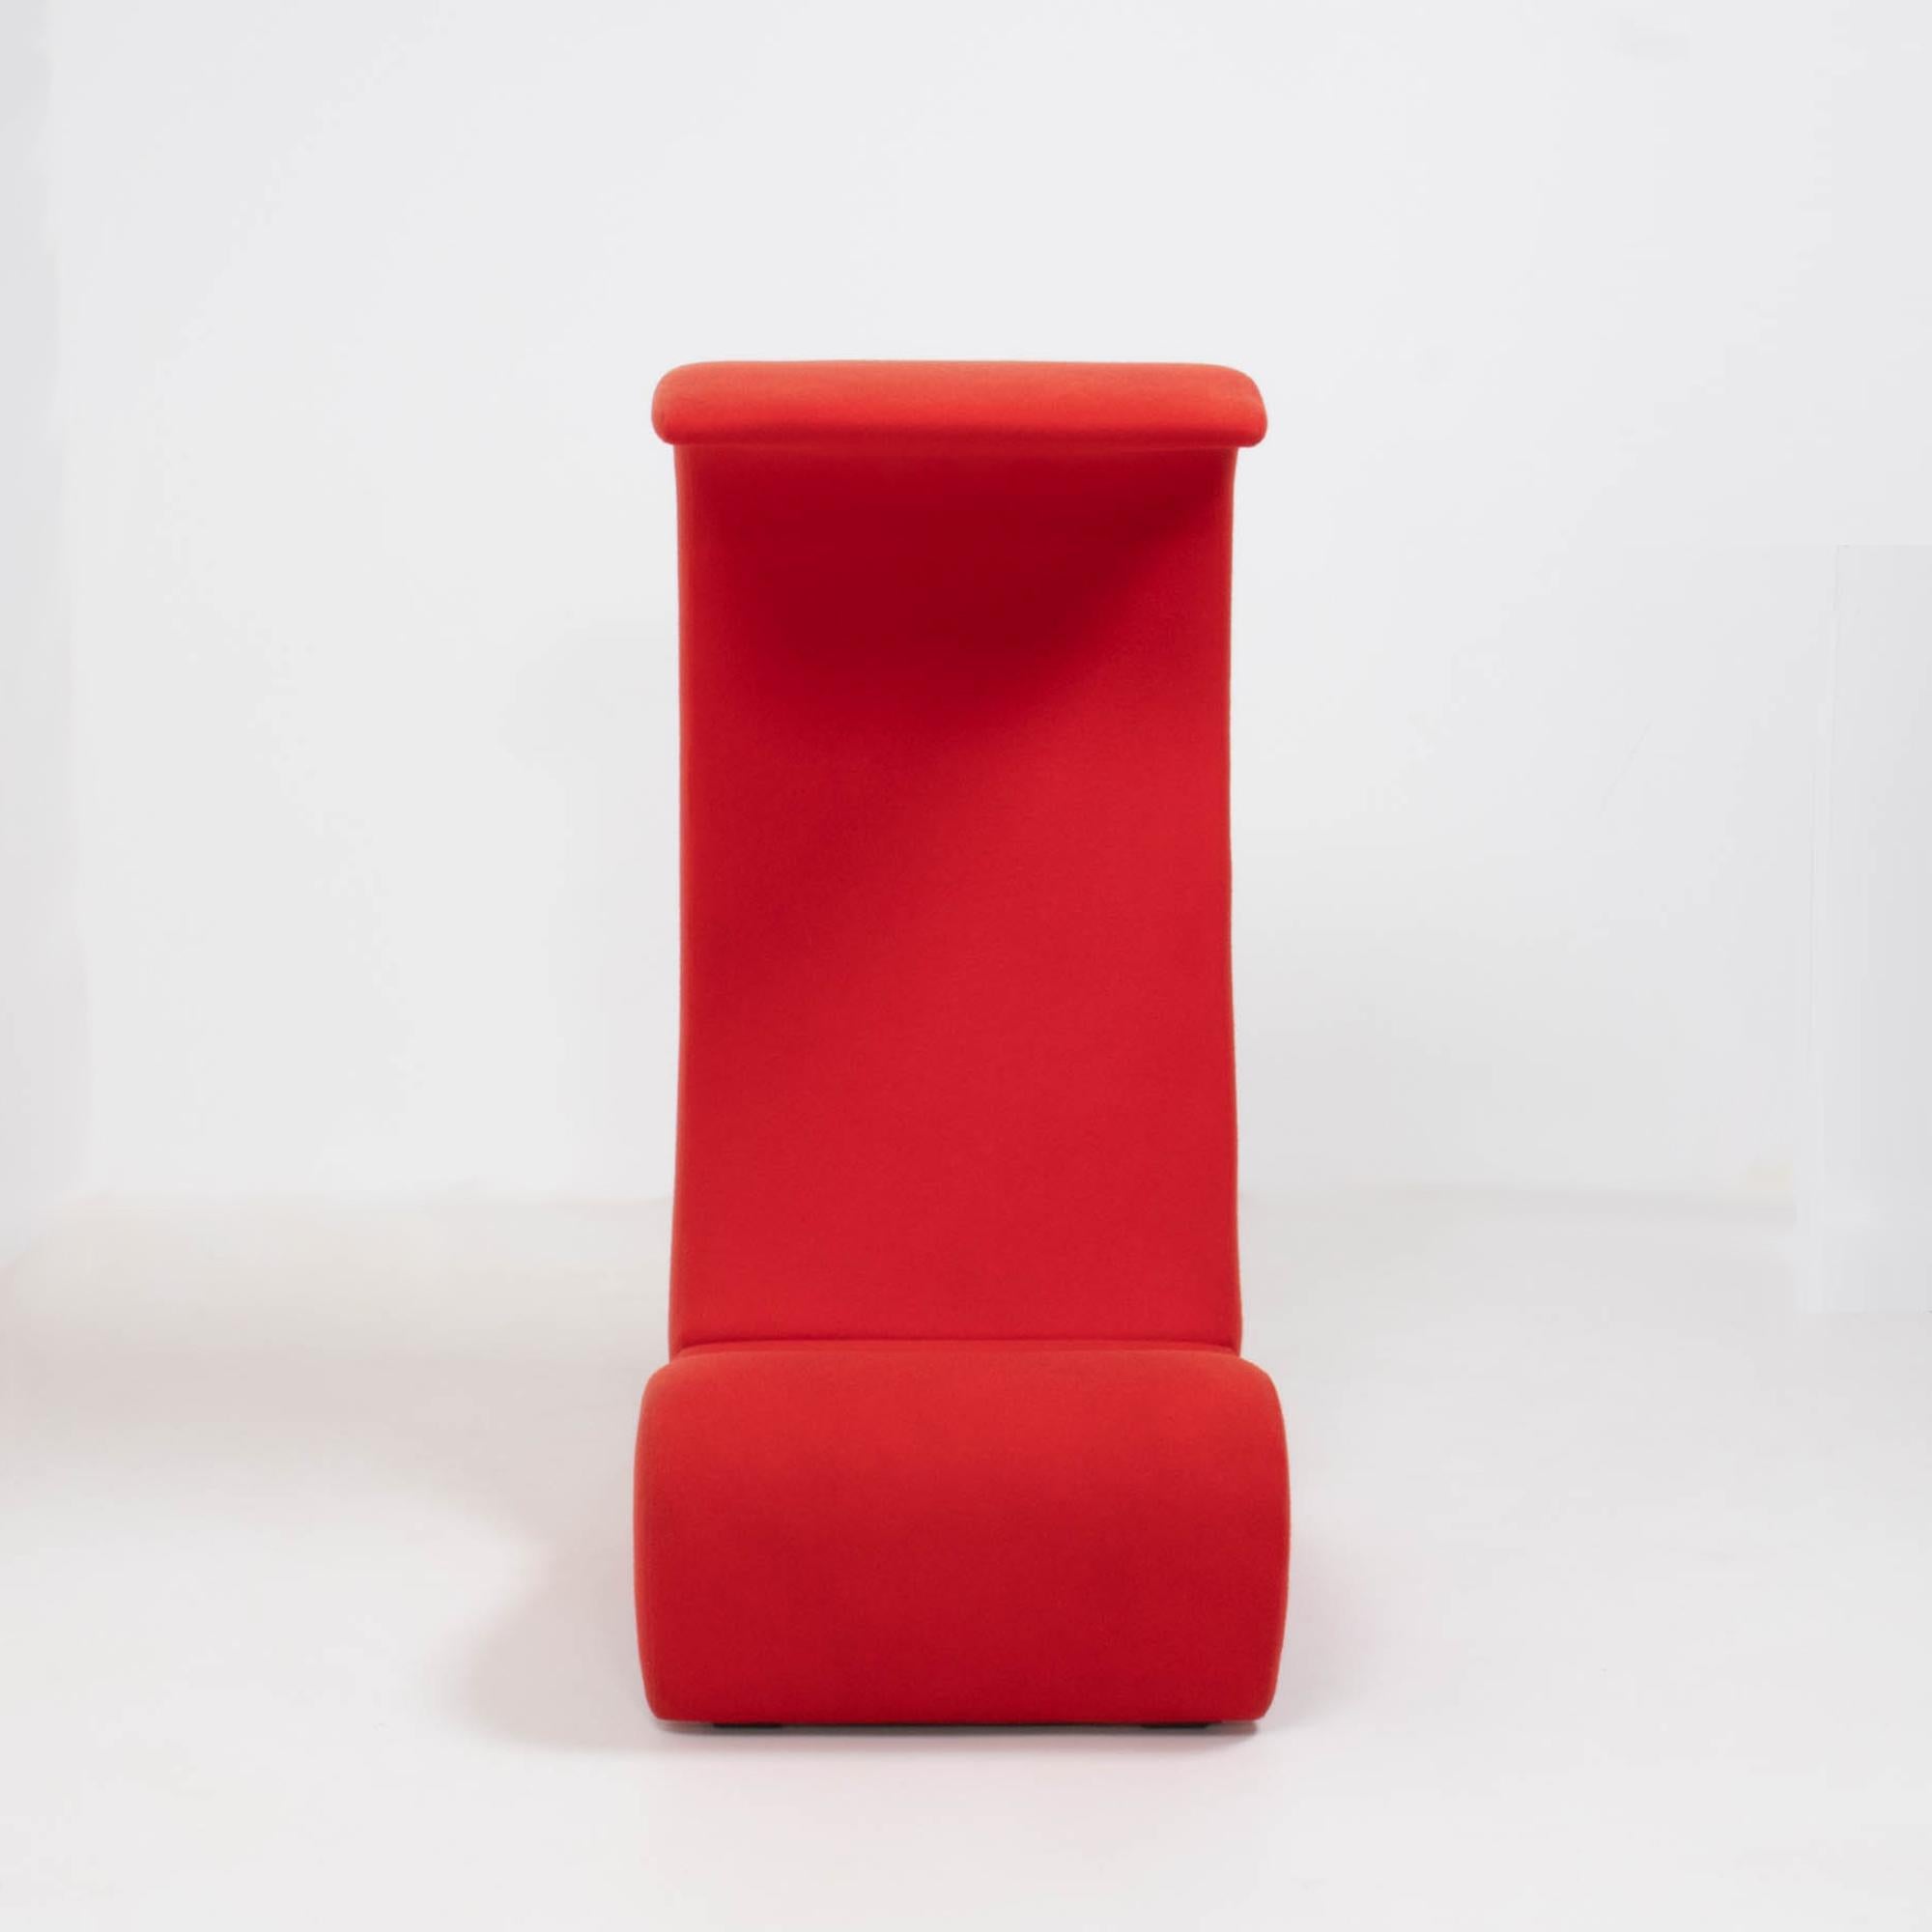 Originally designed by Verner Panton in 1970, the Amoebe Highback chair was created for the Visiona installation and has become a design icon.

Upholstered in bright red fabric, the sinuous curves create a bold and sculptural silhouette which also